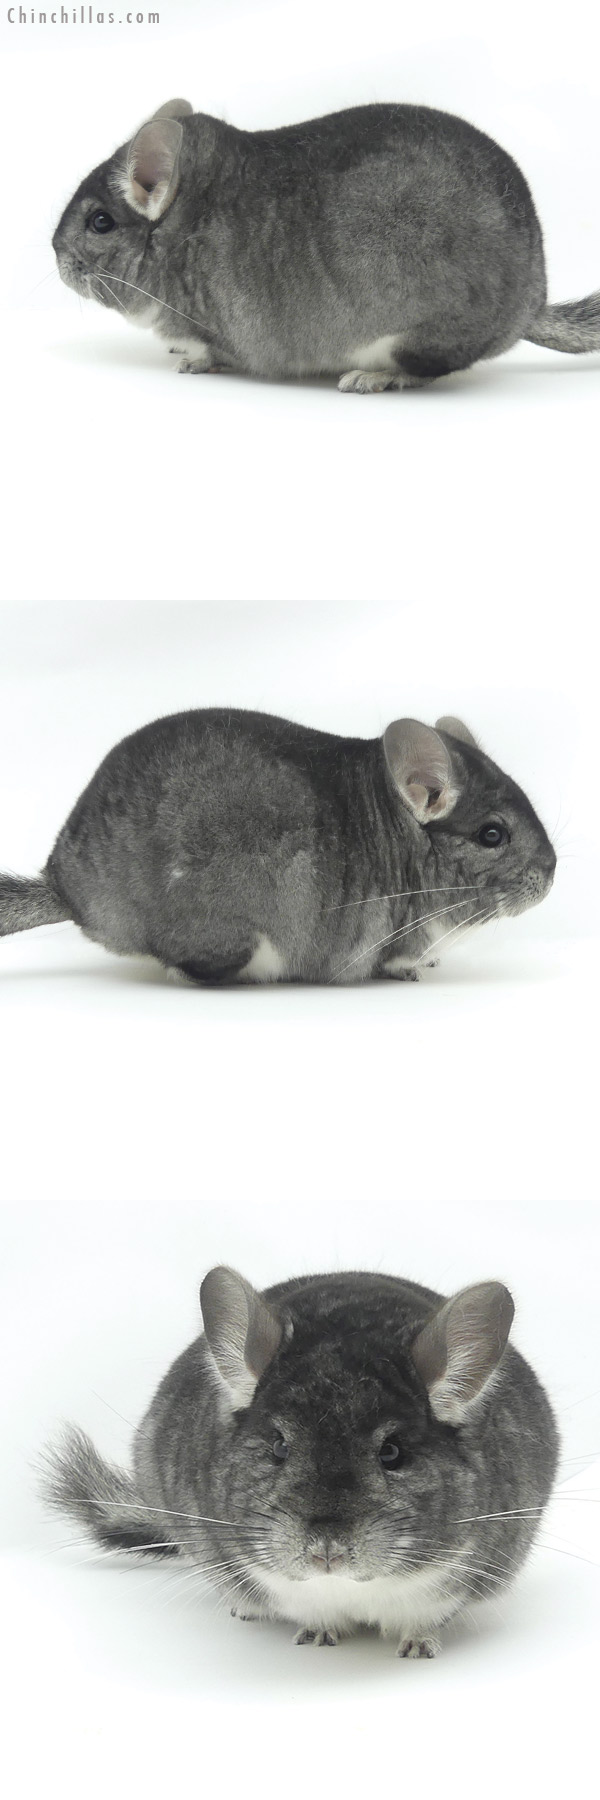 Chinchilla or related item offered for sale or export on Chinchillas.com - 20141 Blocky Premium Production Quality Standard Female Chinchilla